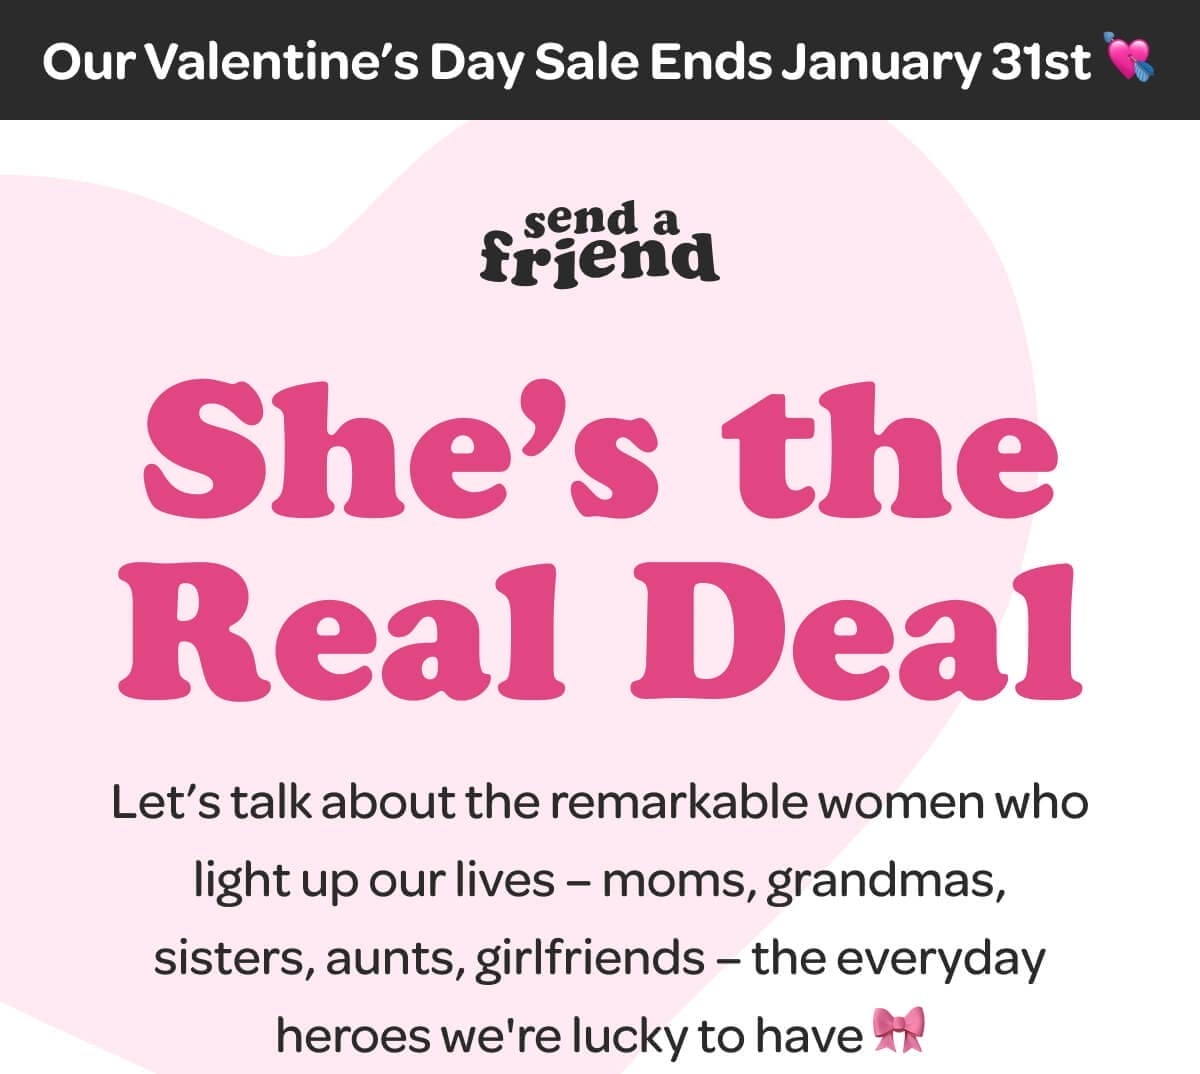 Our Valentine’s Day Sale Ends January 31st 💘 She’s the Real Deal. Let’s talk about the remarkable women who light up our lives – moms, grandmas, sisters, aunts, girlfriends – the everyday heroes we're lucky to have 🎀